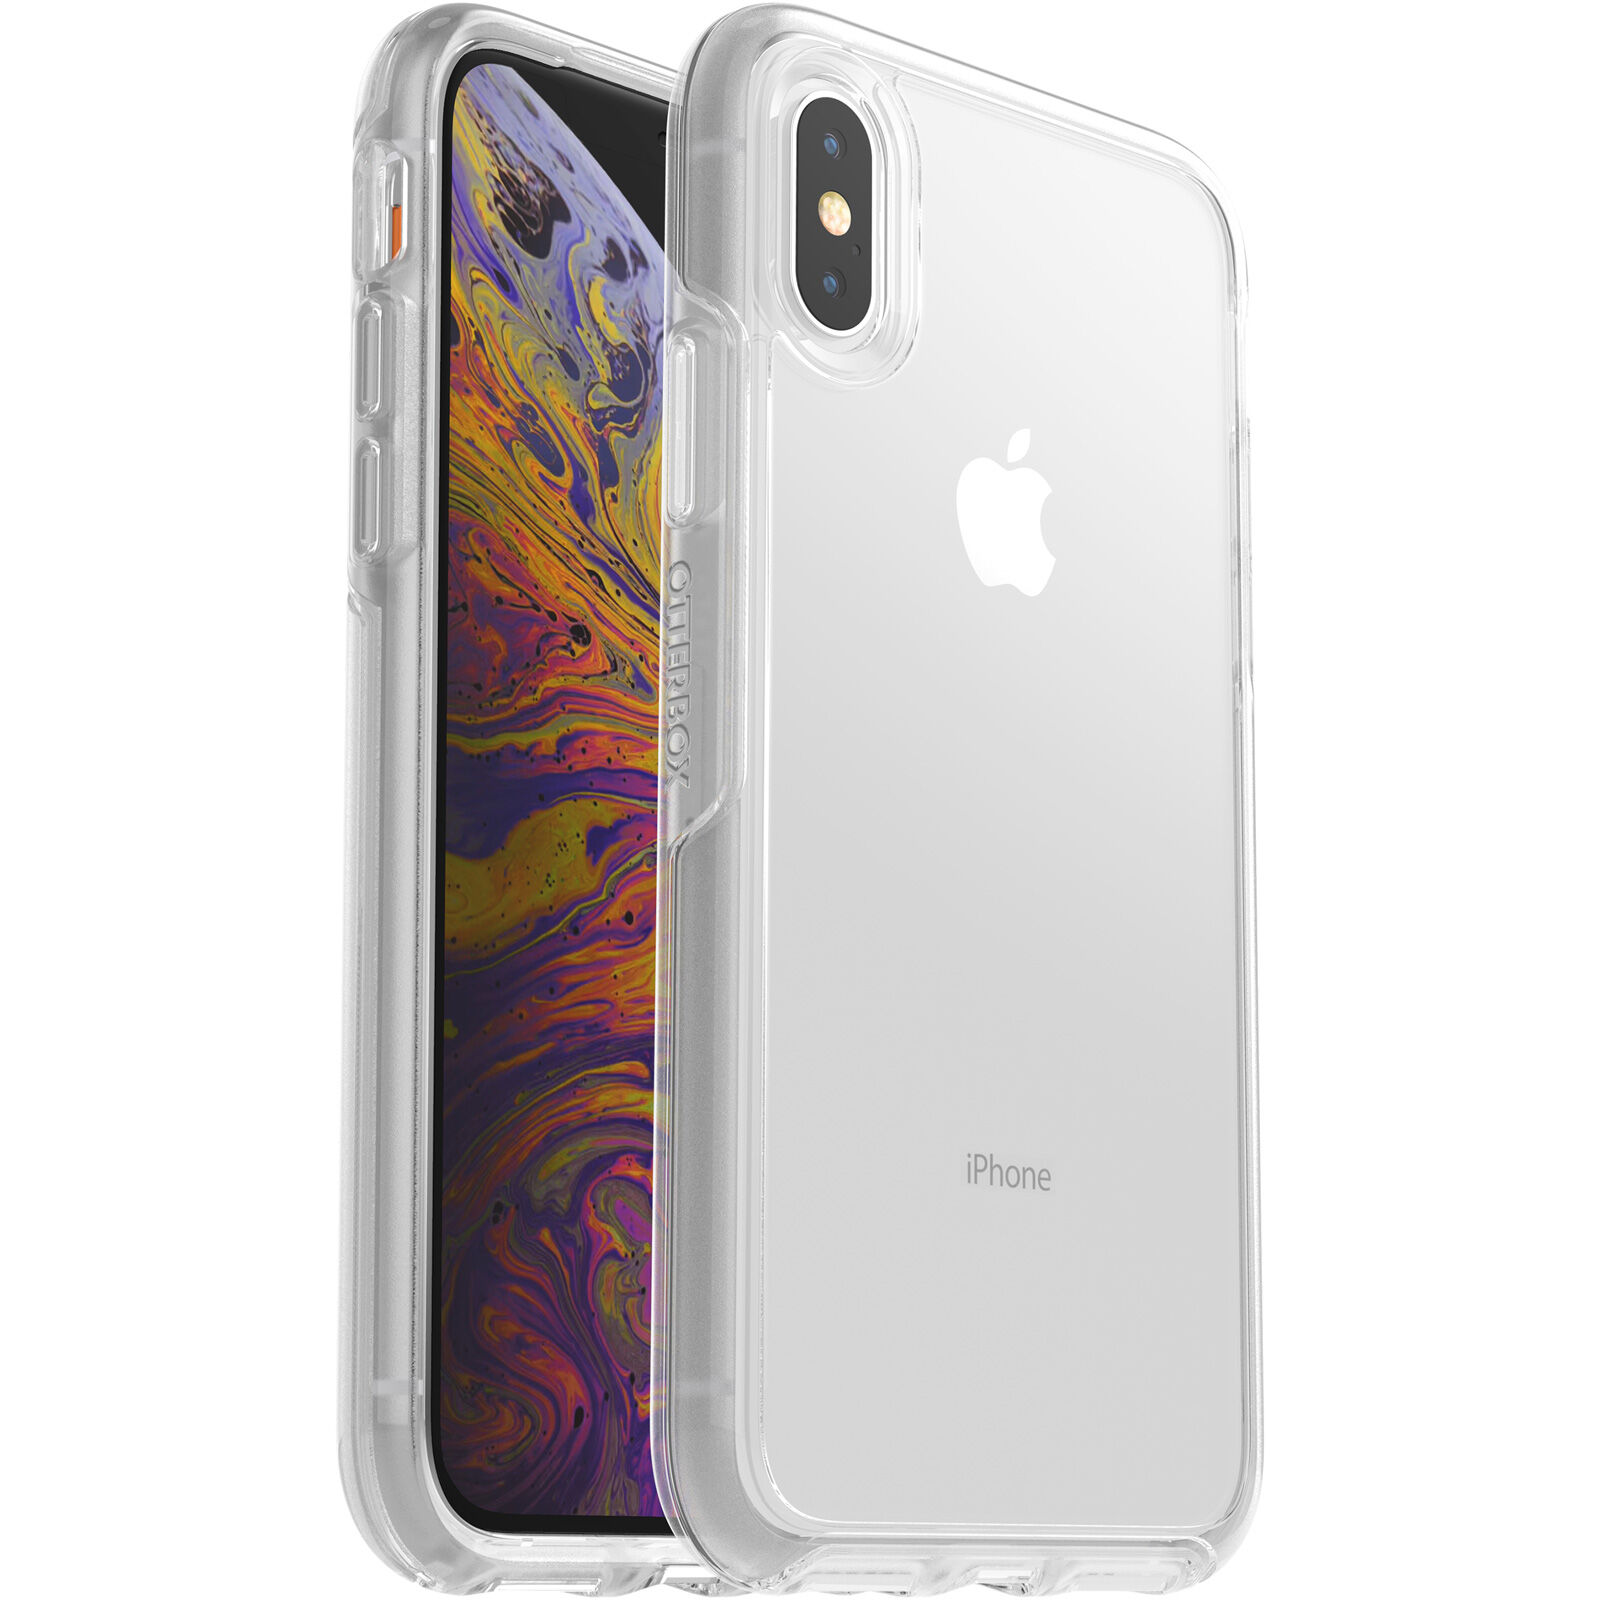 Cool iPhone X/Xs Cases | OtterBox Symmetry Series Clear Cases